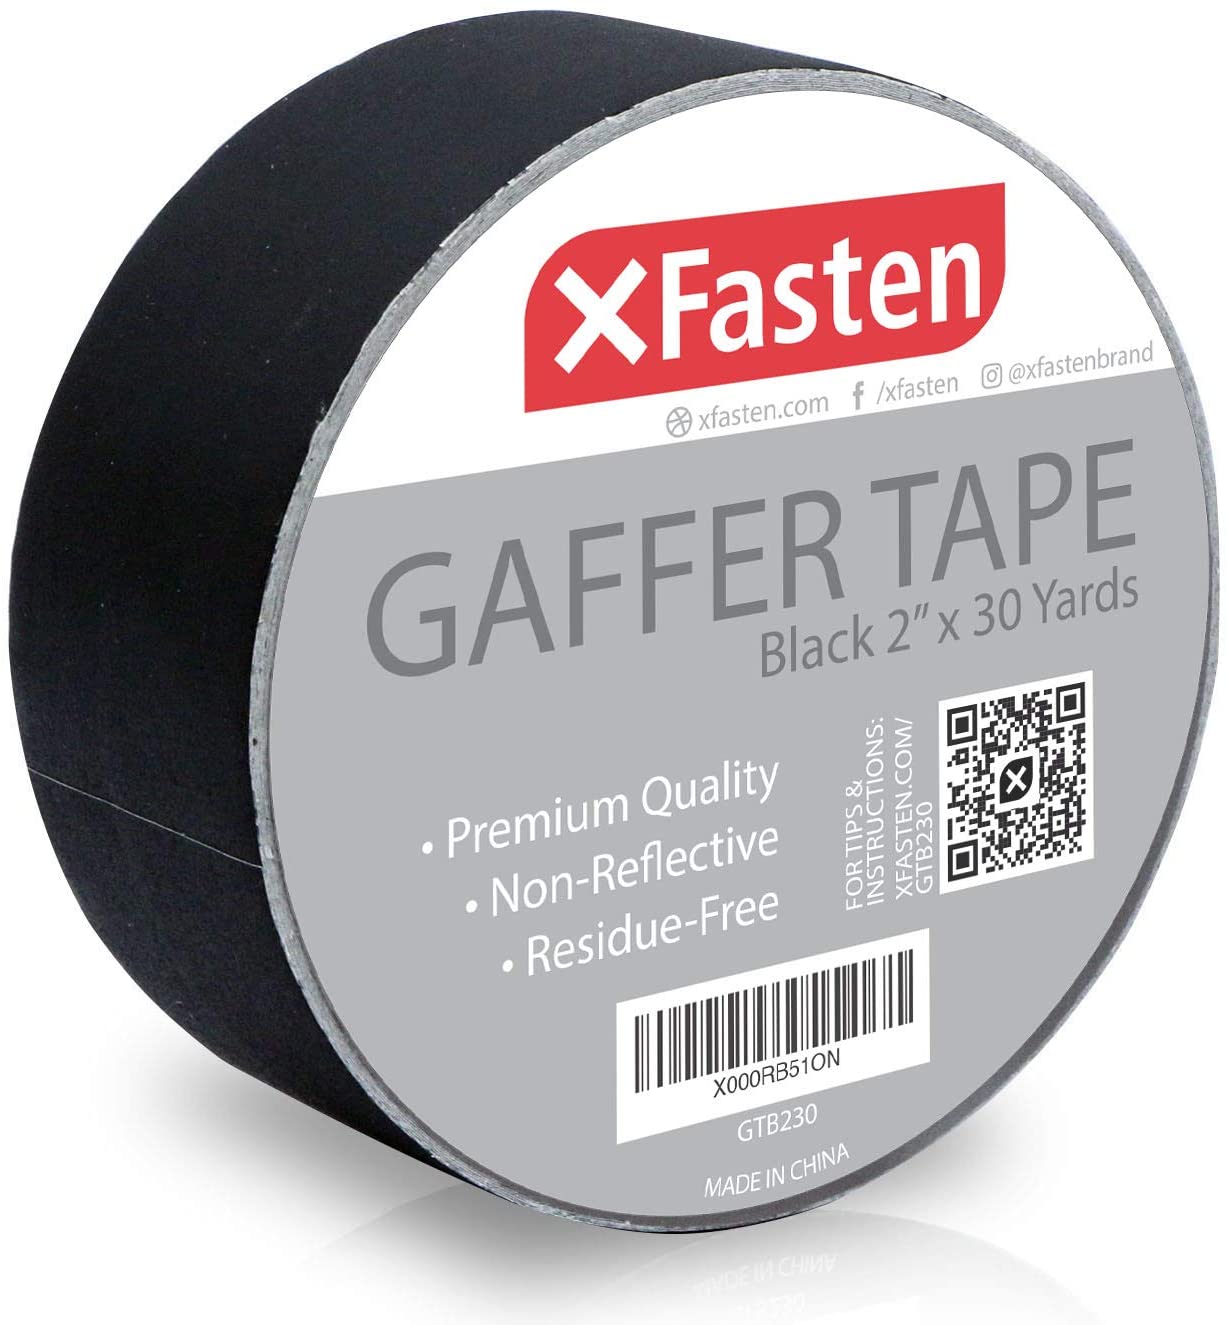 XFasten Professional Grade Black Gaffer Tape, Inch X 30 Yards, Residue  Free, Non reflective and Easy to Tear Pro Gaff Tape for Photographers, DJs-  Main Stage Gaffer Tape